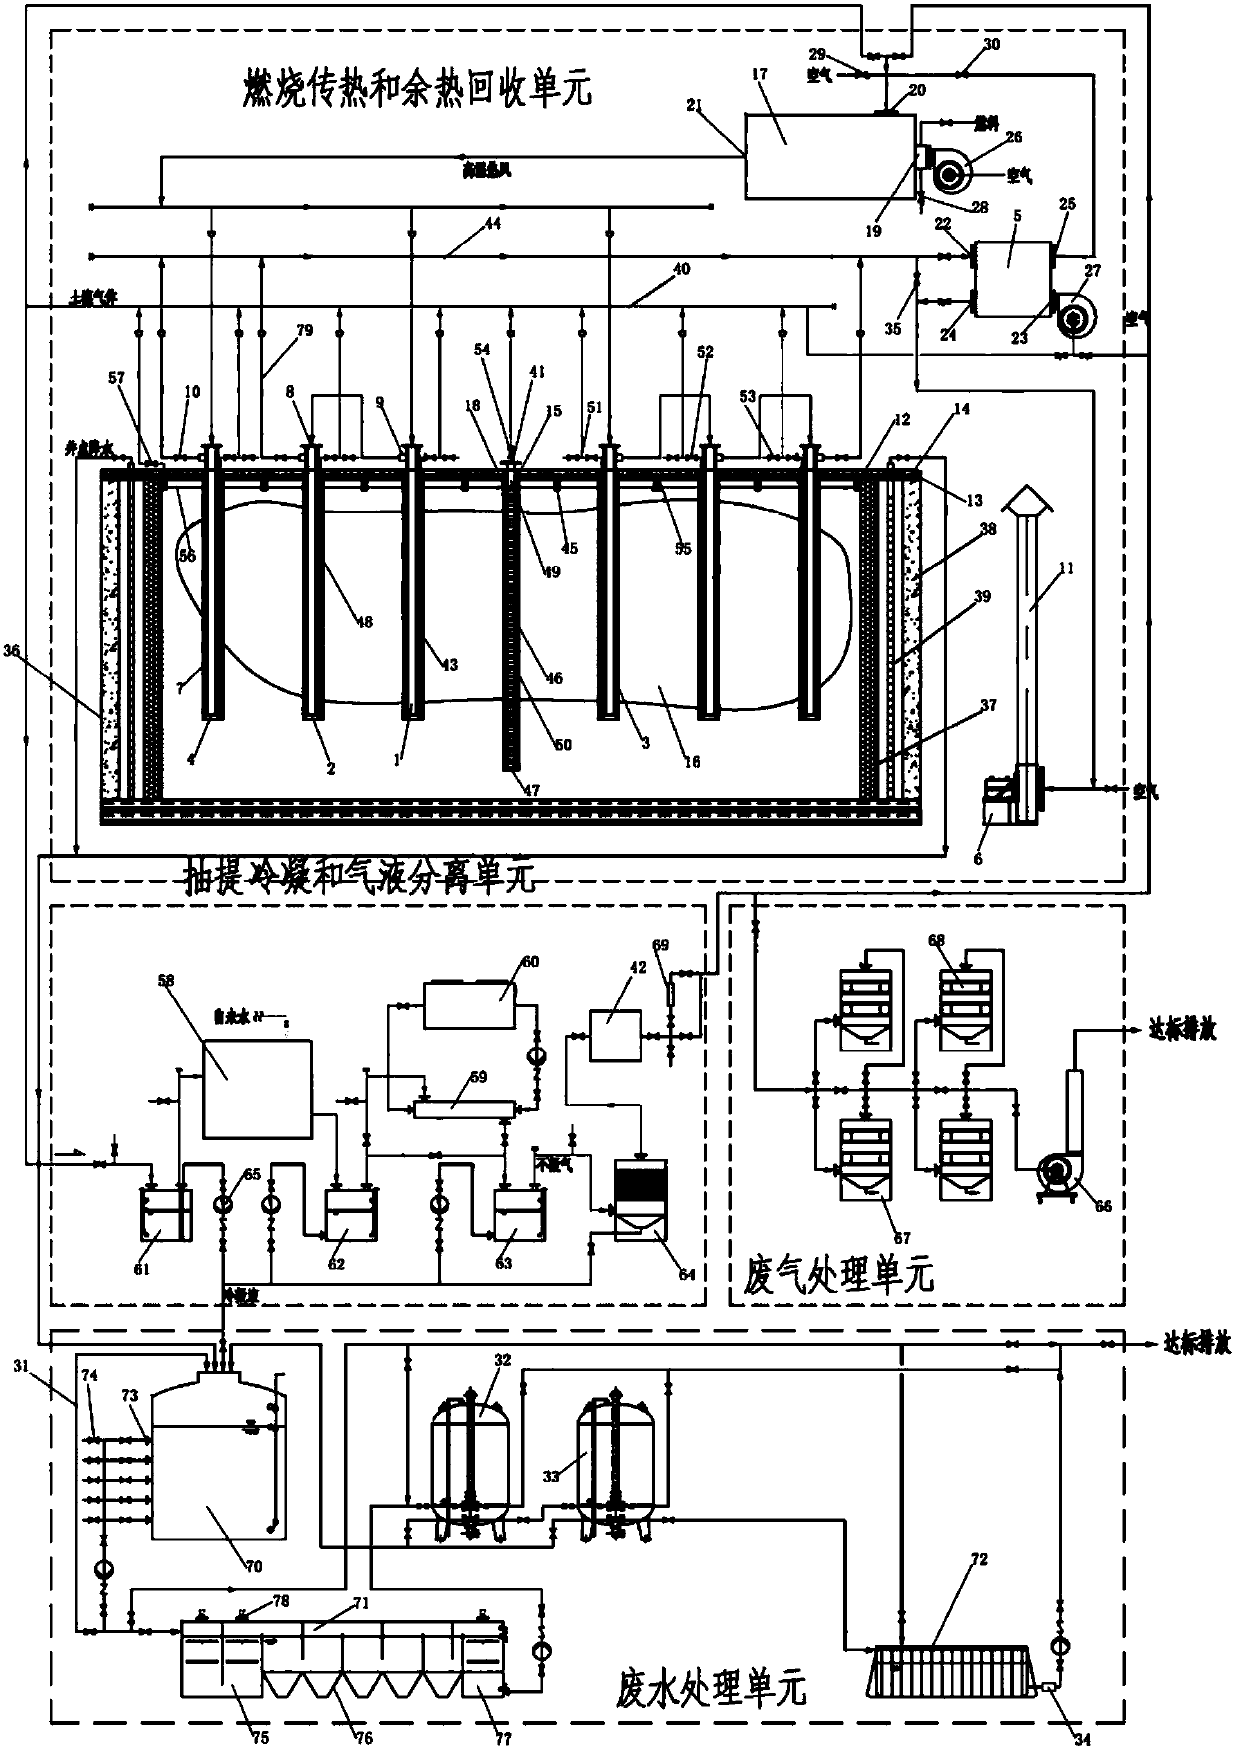 Concentrated combustion type in-situ thermal desorption repairing device for contaminated site